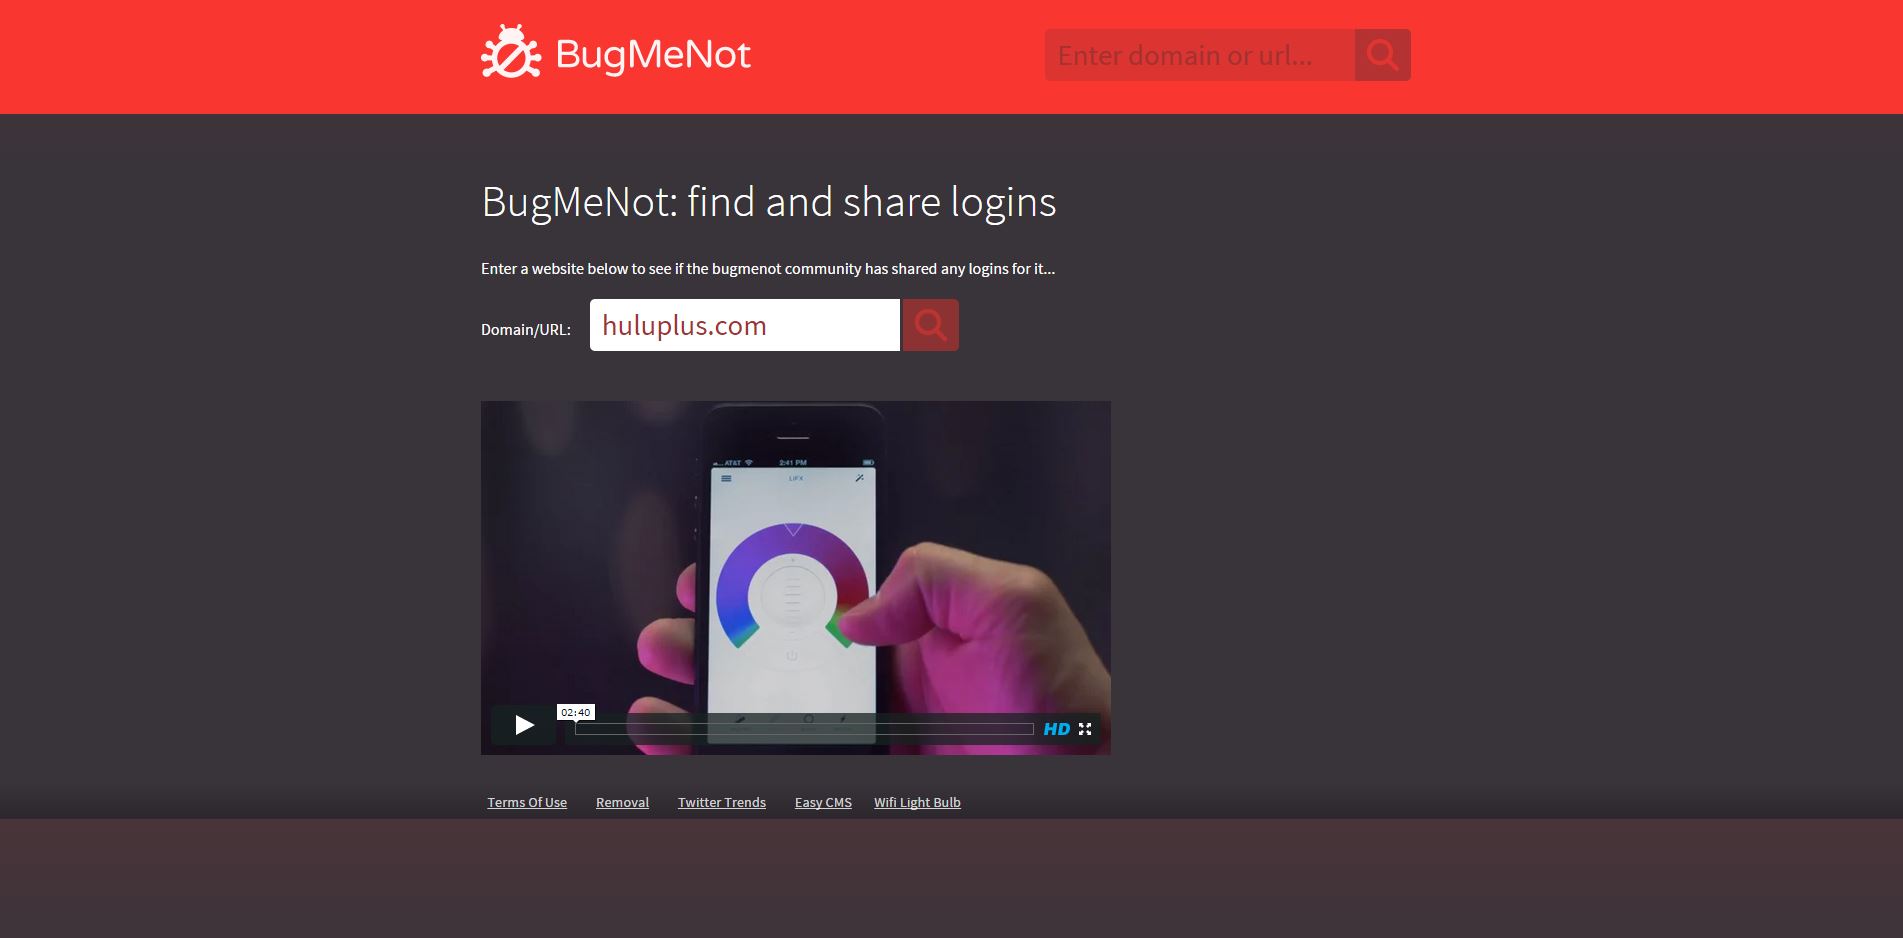 <a href="http://bugmenot.com/" target="_blank">bugmenot.com</a> - Instead of creating new logins to every website you visit, use BugMeNot's thousands of shared logins. Simply enter your url, and you are off.